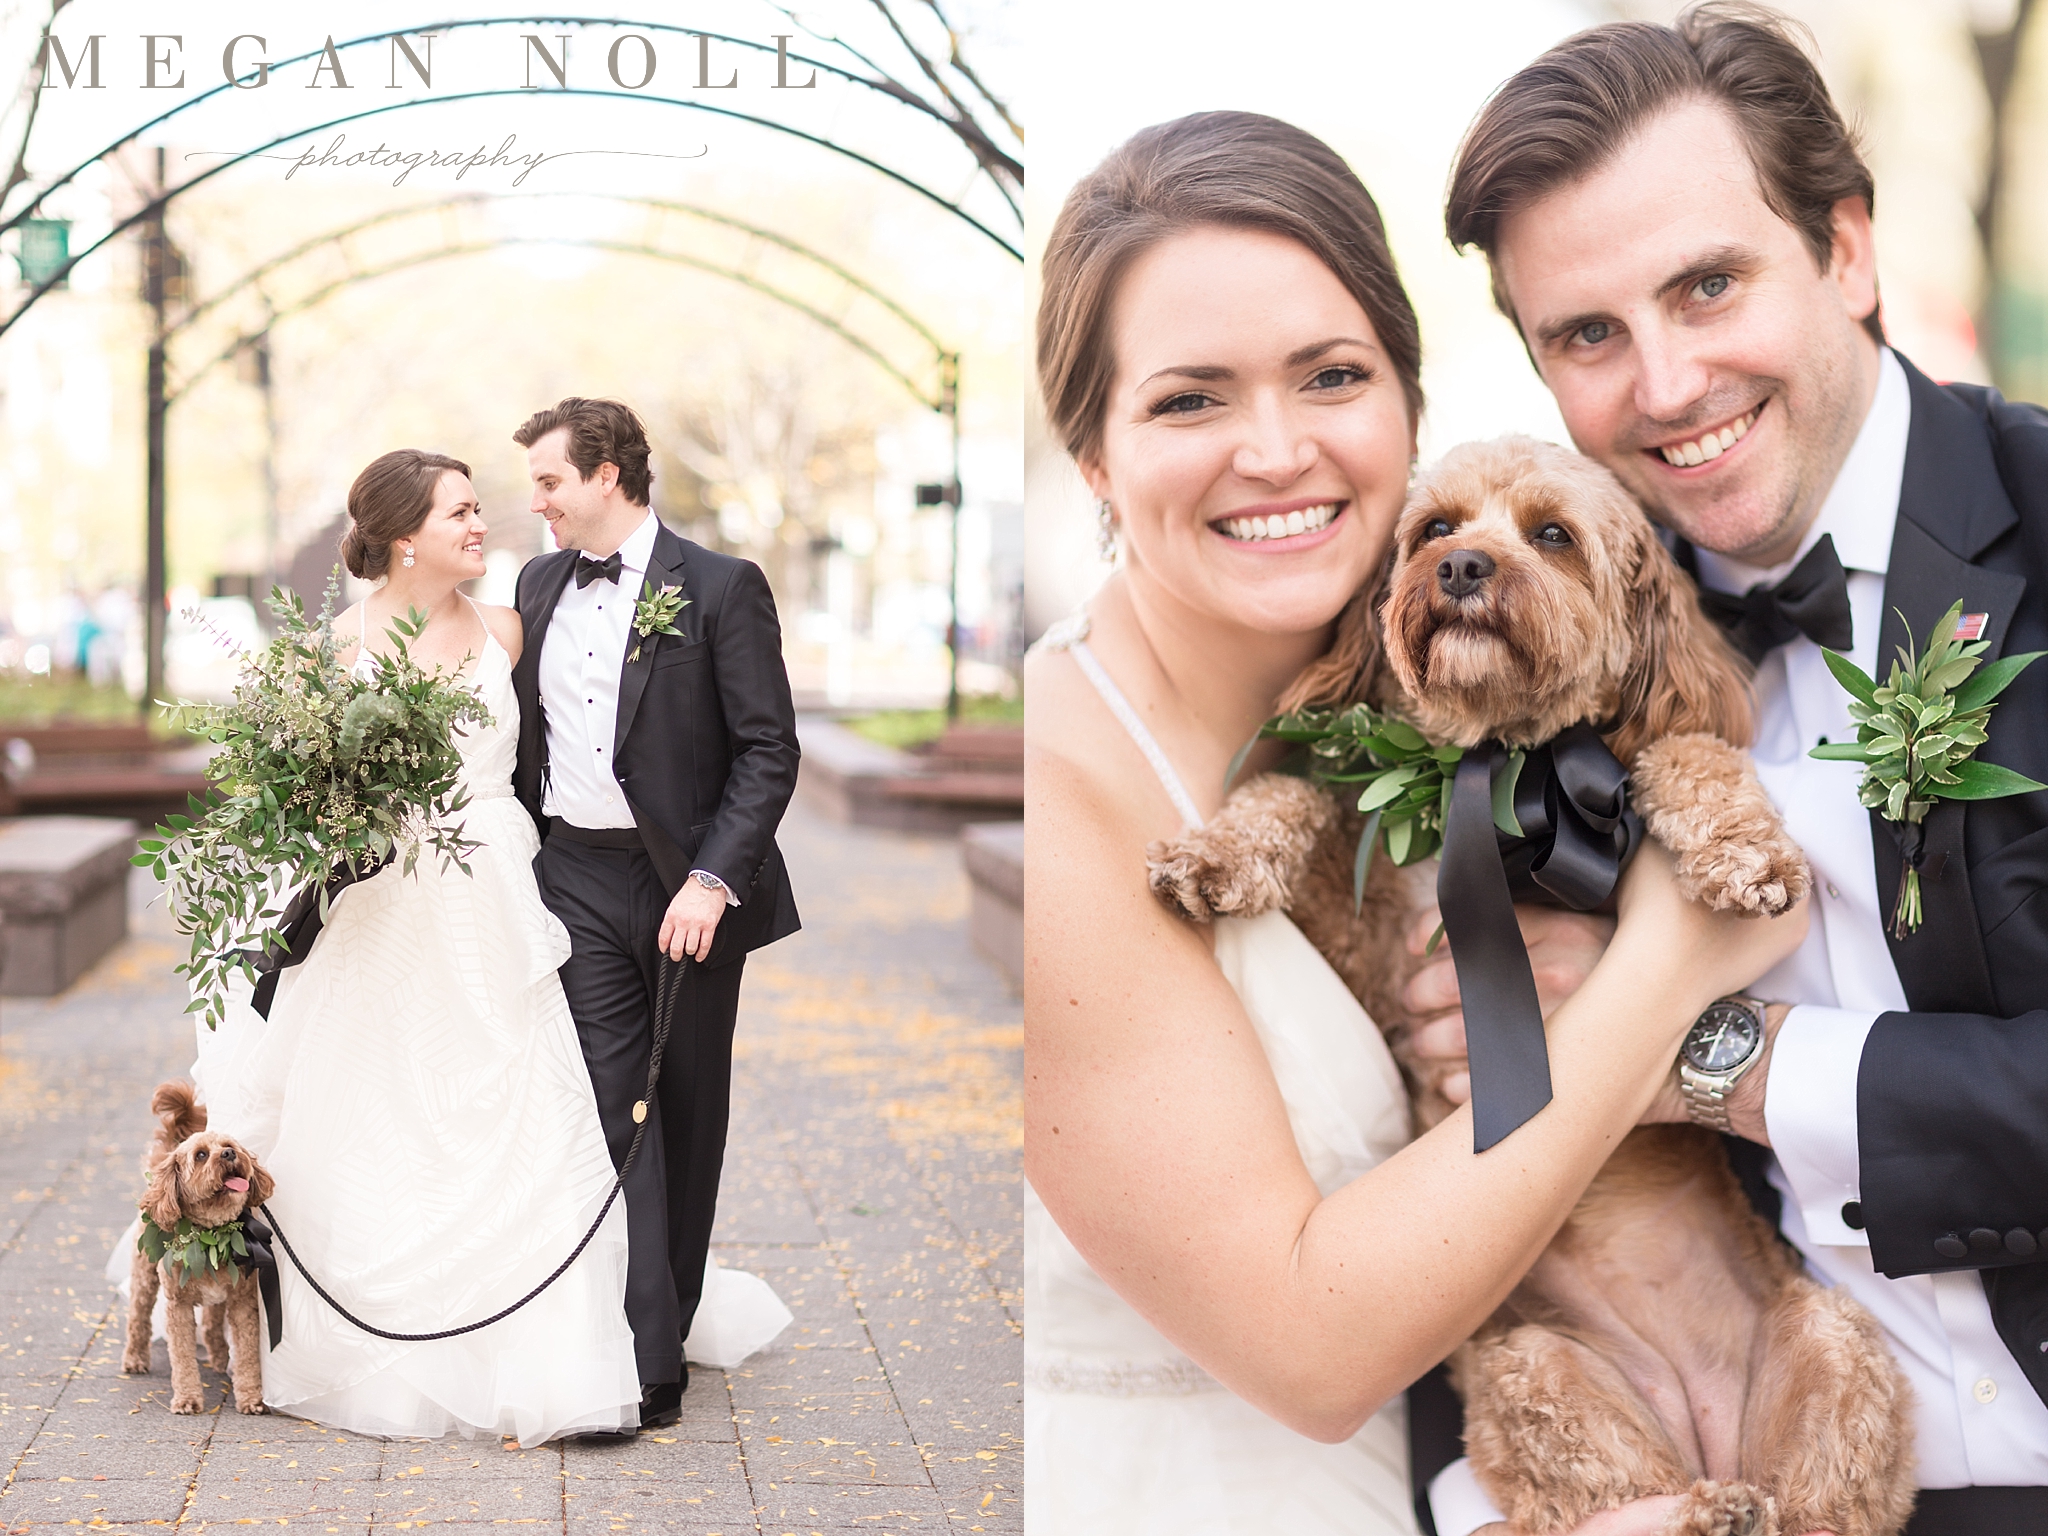 Incorporating Your Puppy Into Pictures, Dogs in Wedding Pictures